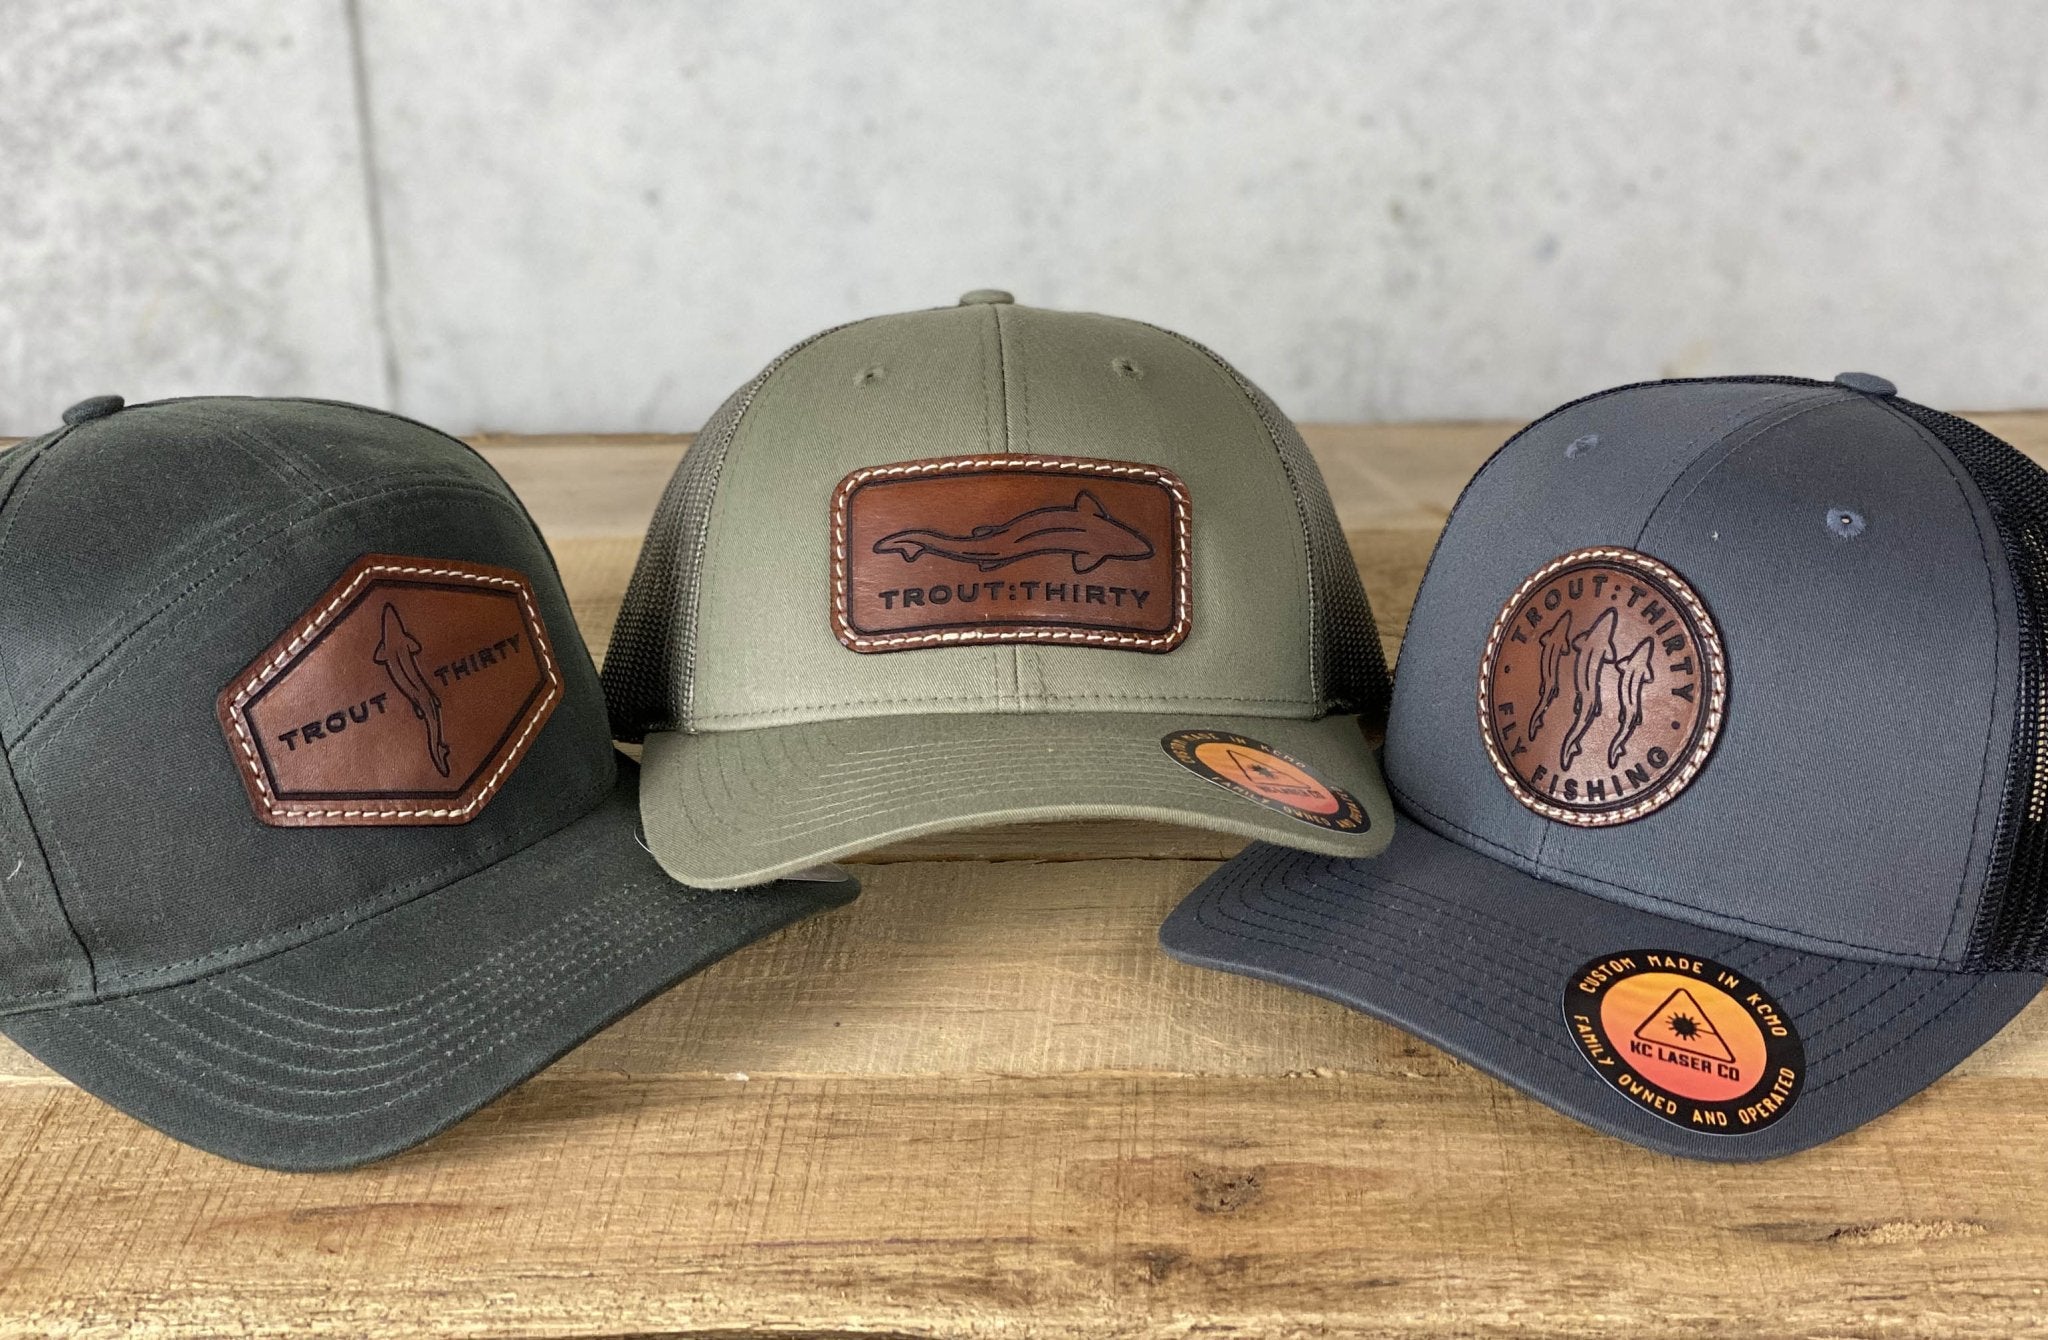 Custom Leather Ohio Flag Patch Hat. Ohio Leather Truck Hat. Laser Engraved Patch Hat. Dark Brown / Black/Gray